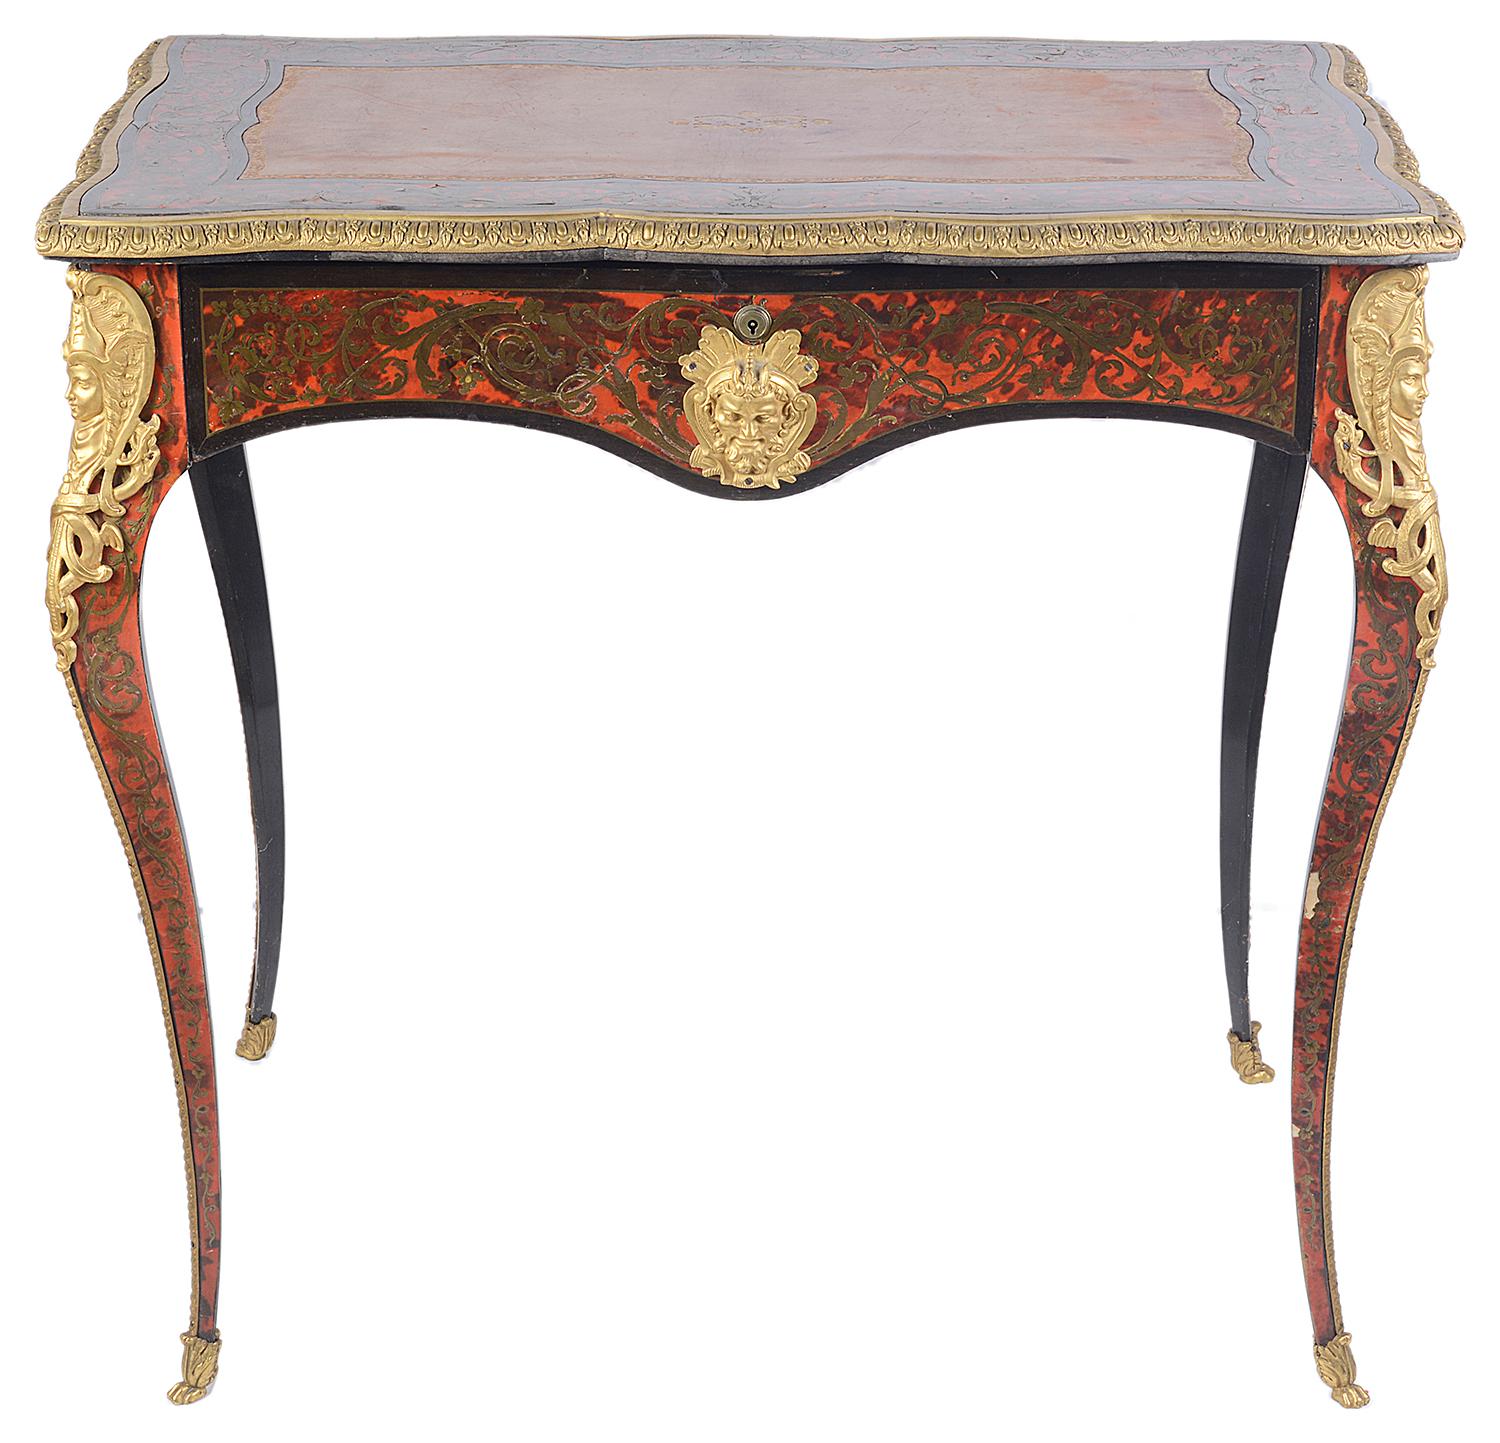 A good quality small late 19th century French Boulle inlaid bureau plat, having an inset leather top, brass inlay and tortoiseshell to the top, frieze and legs, gilded ormolu mounts, a single frieze drawer with a Bramah lock and raised on elegant